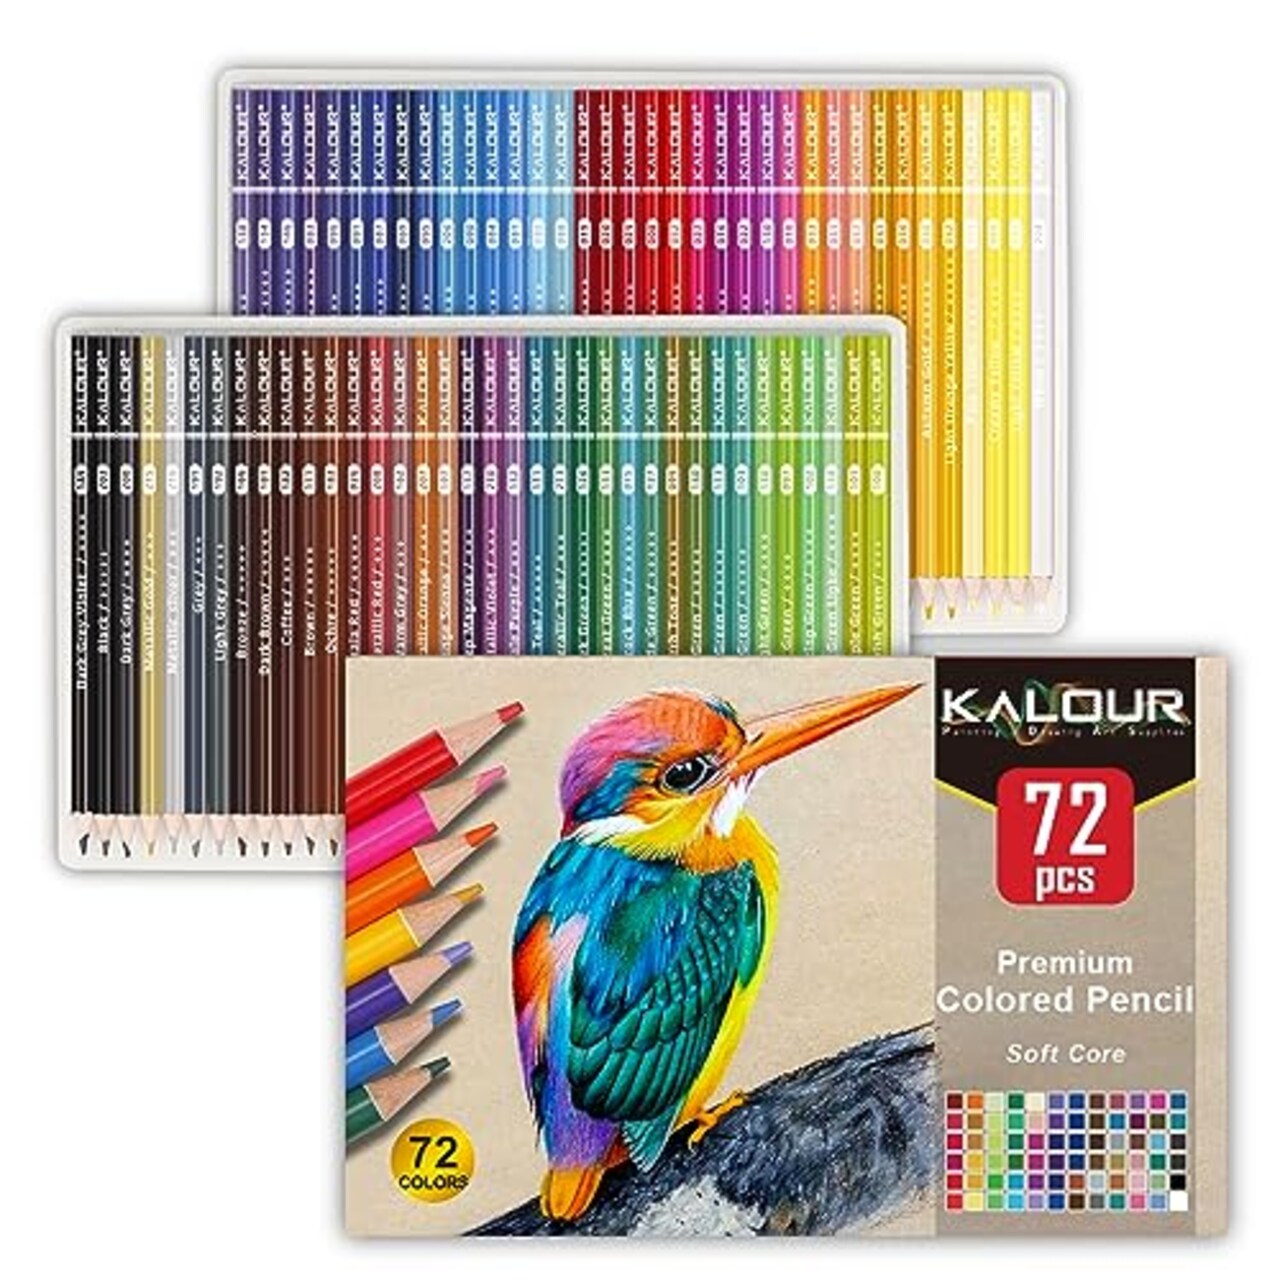 KALOUR 72 Count Colored Pencils for Adult Coloring Books, Soft Core,Ideal  for Drawing Blending Shading,Color Pencils Set Gift for Adults Kids  Beginners